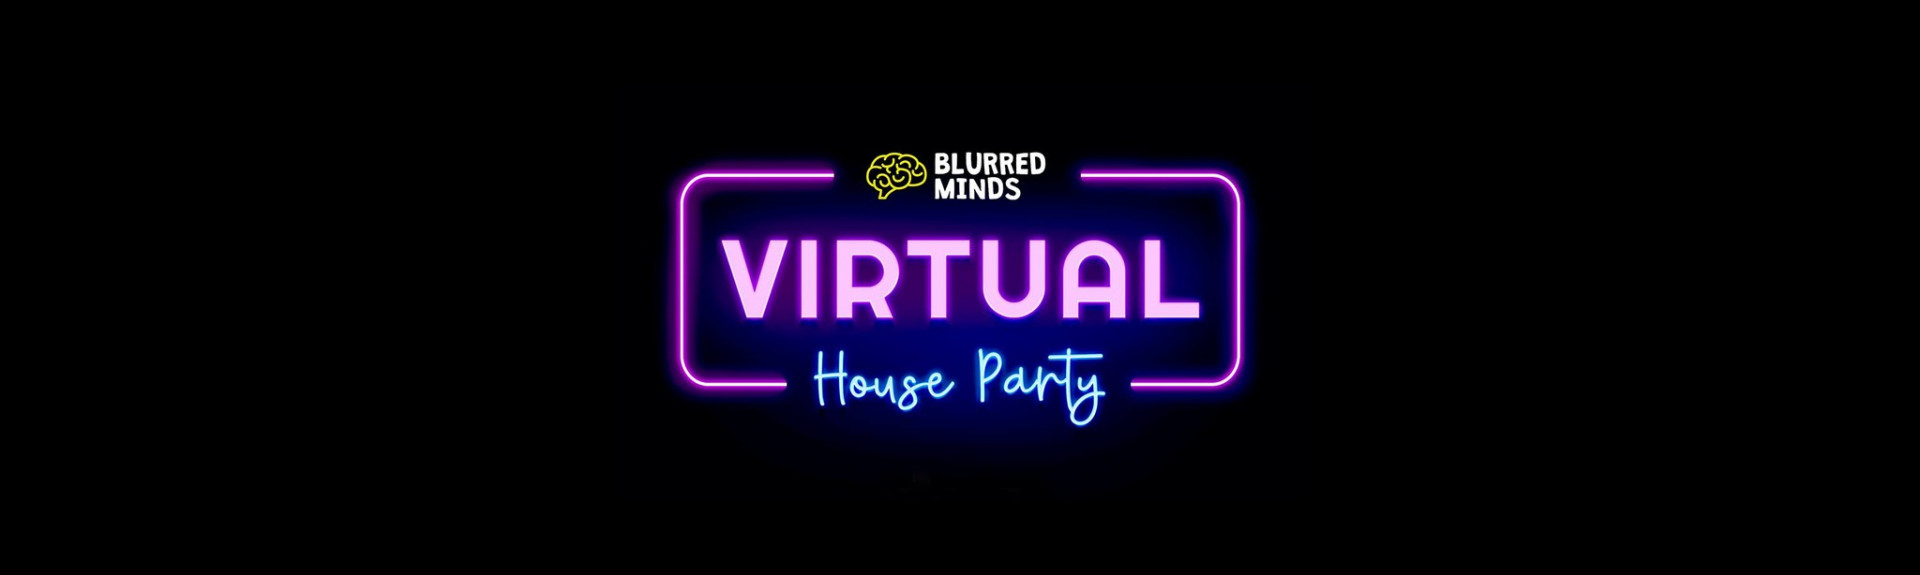 Blurred Minds: Virtual House Party